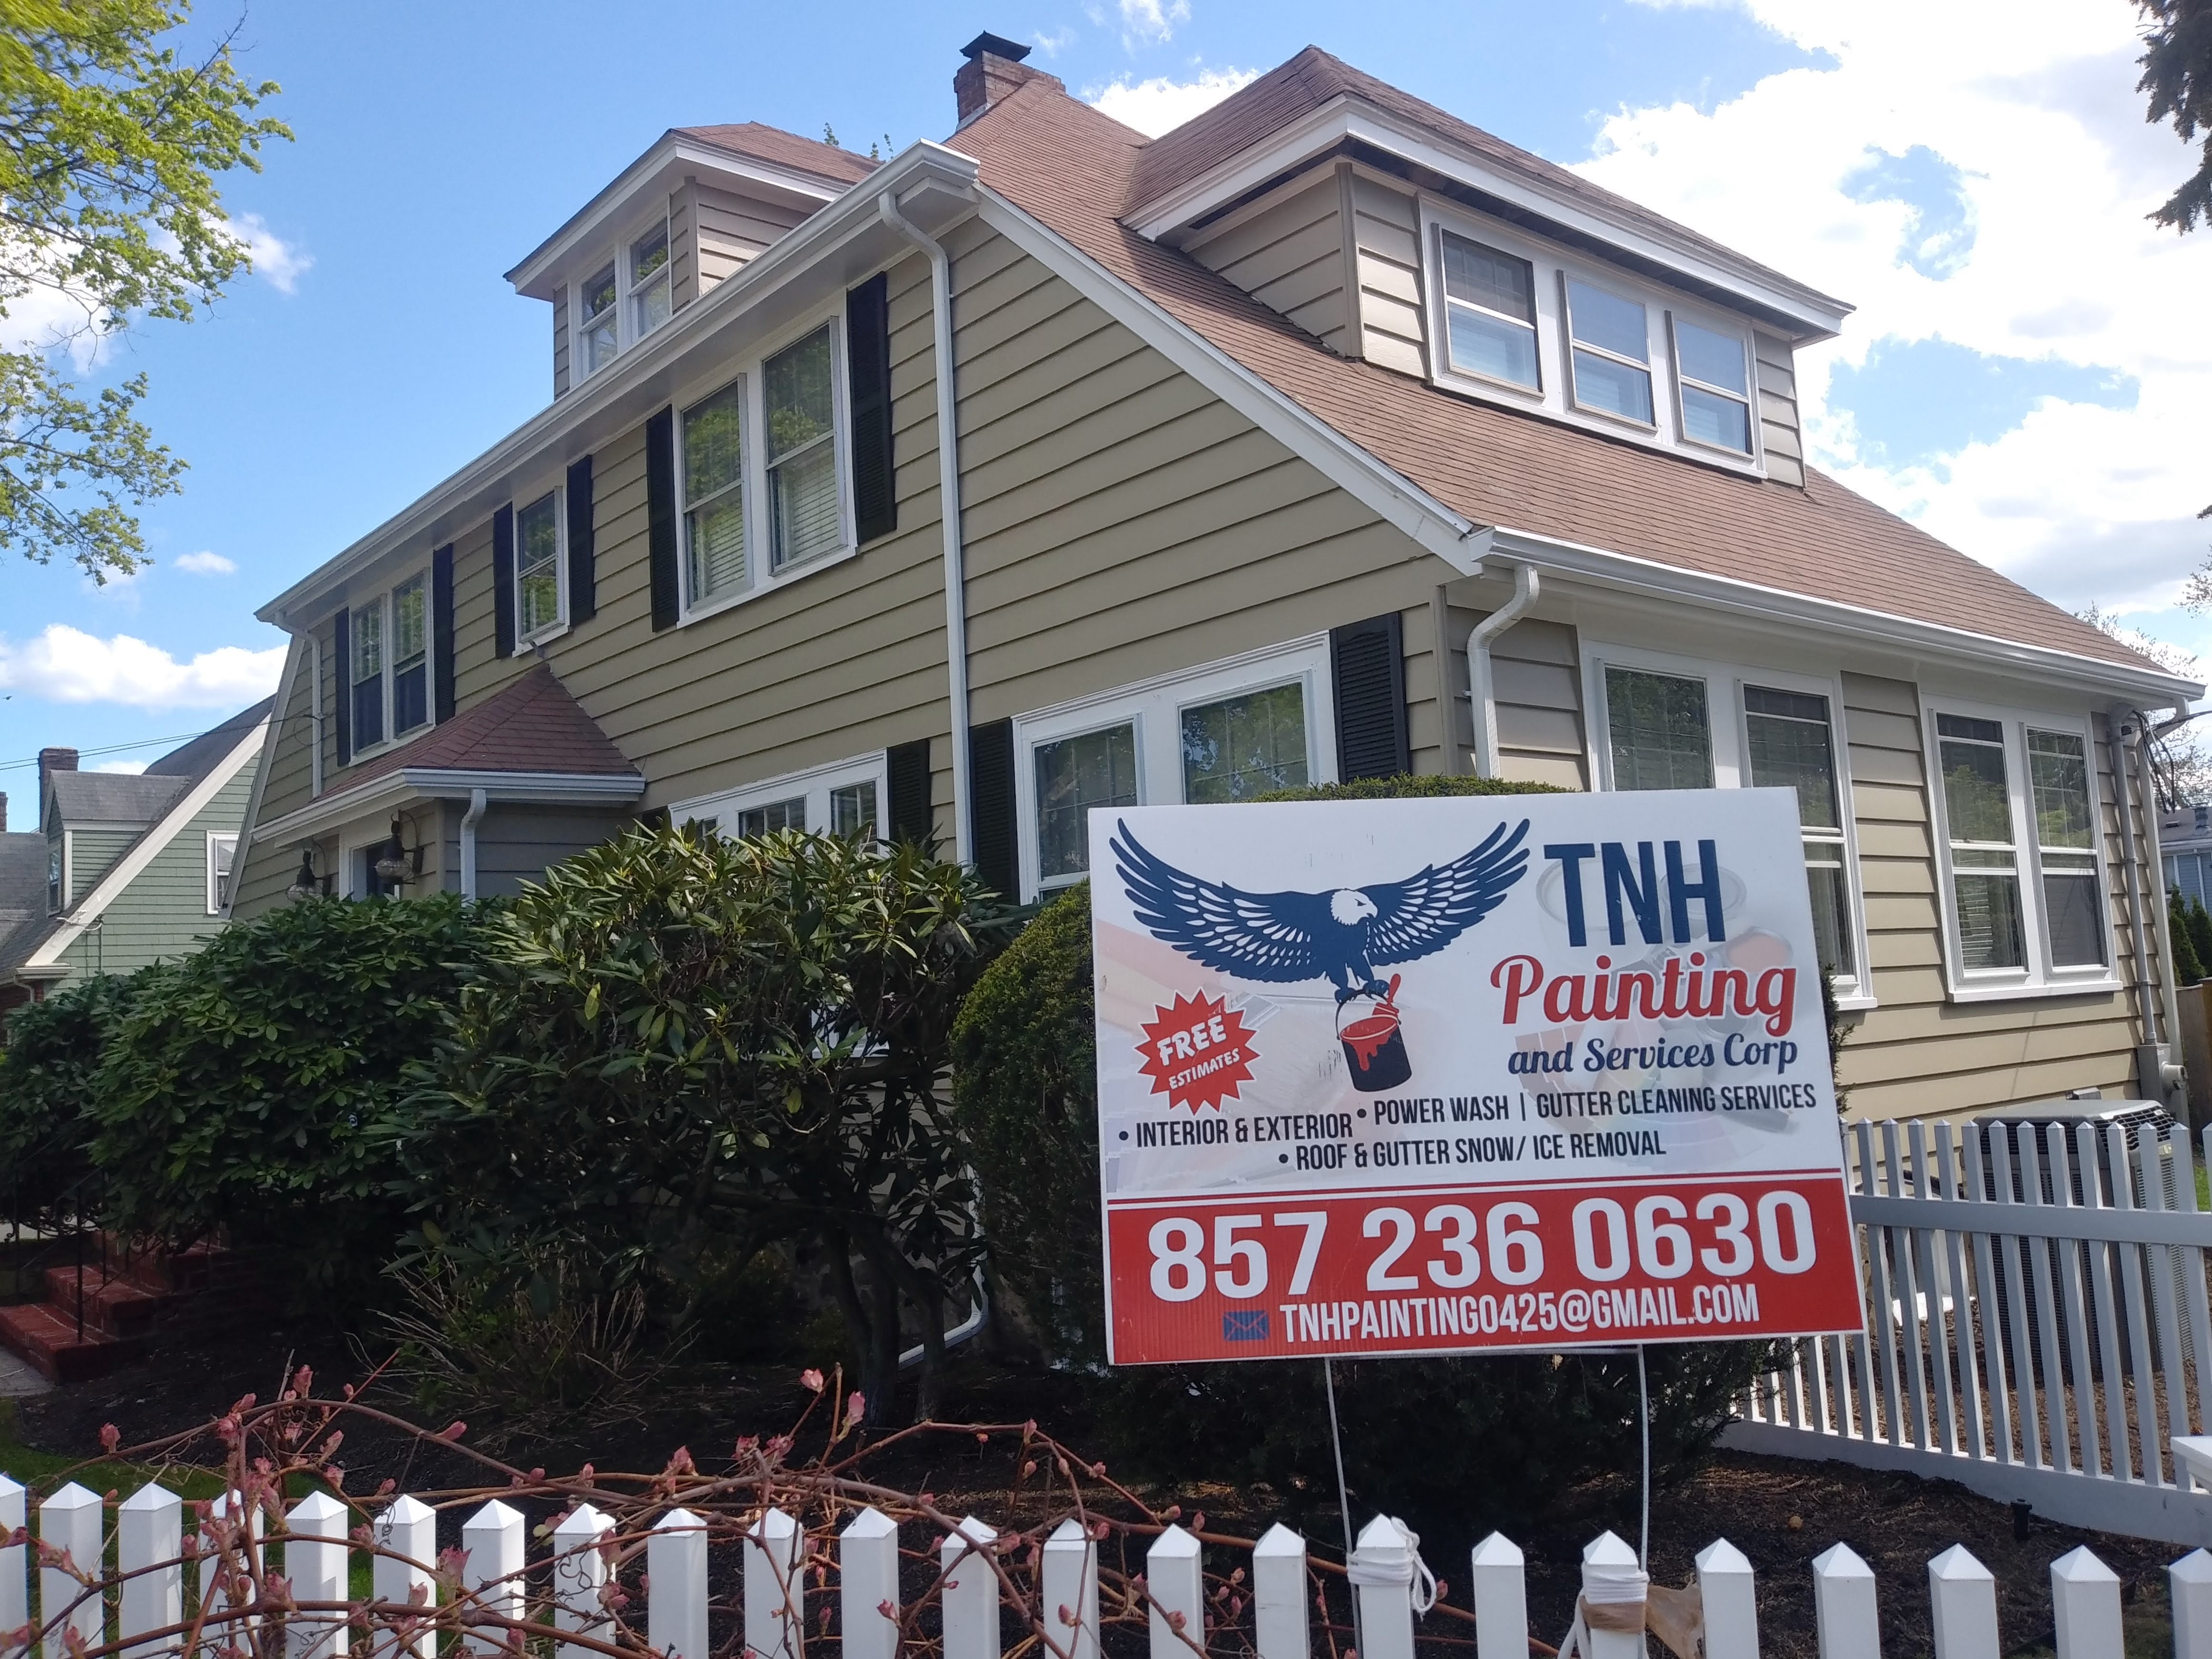 TNH Painting & Services Corp. Logo